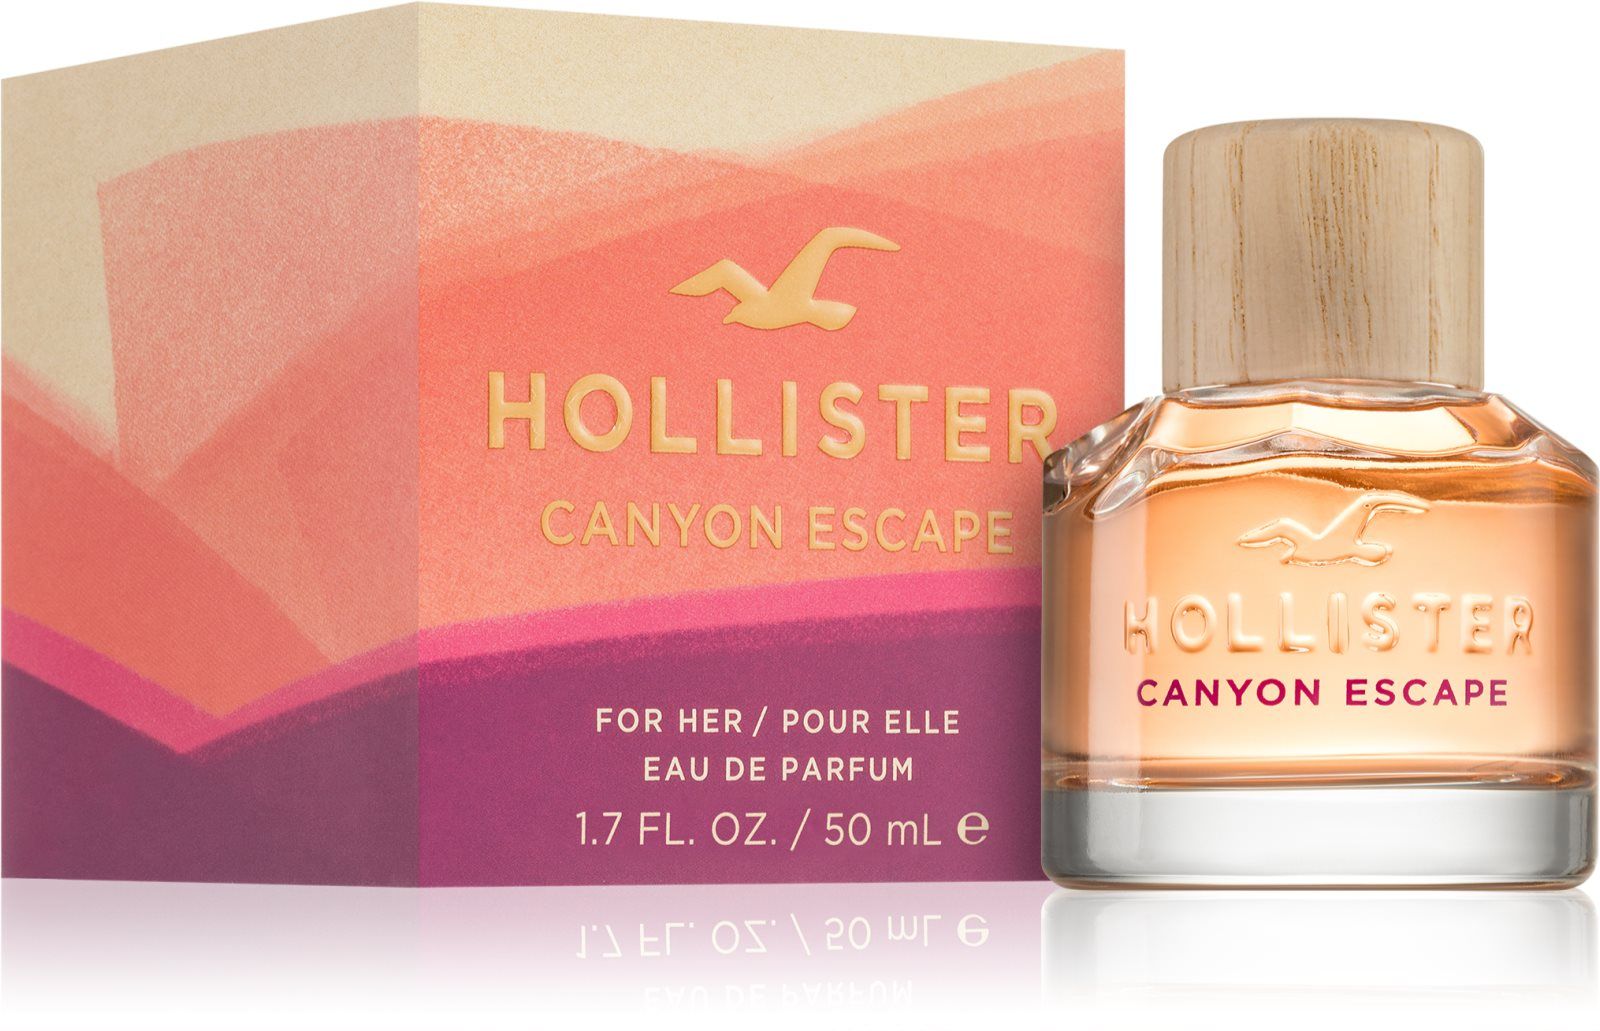 Hollister canyon escape. Hollister Canyon. Hollister Canyon Escape woman тестер. Hollister Canyon Sky for her woman 30ml. Hollister Canyon Sky for her.